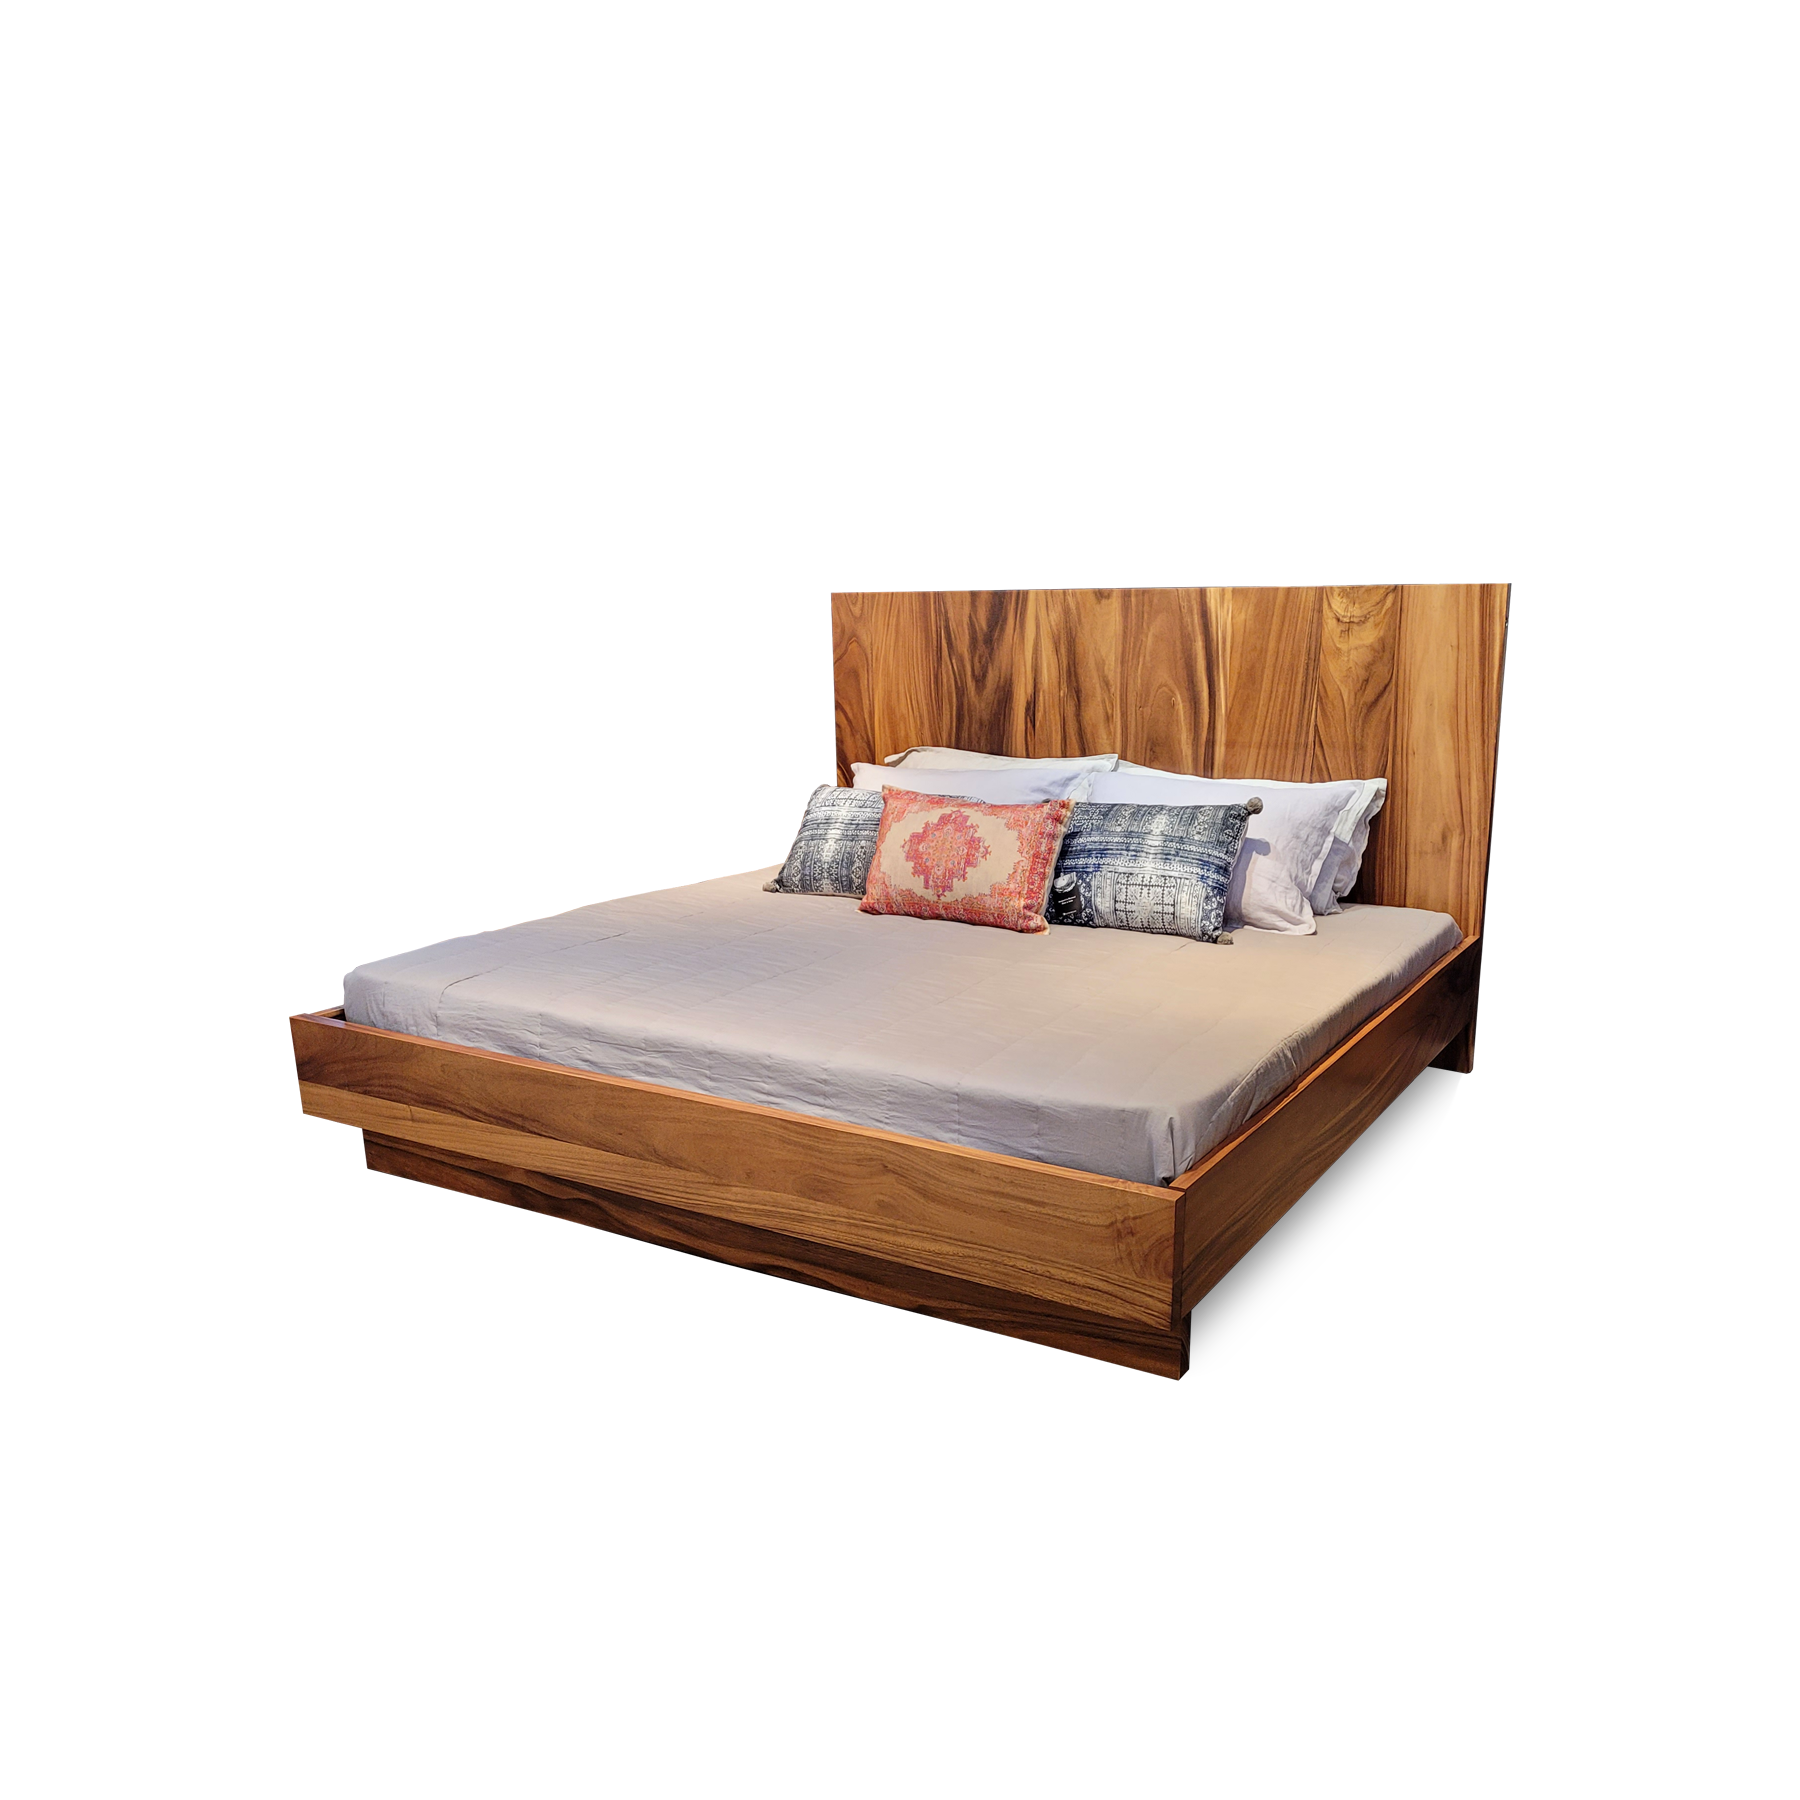 Swee king size bed